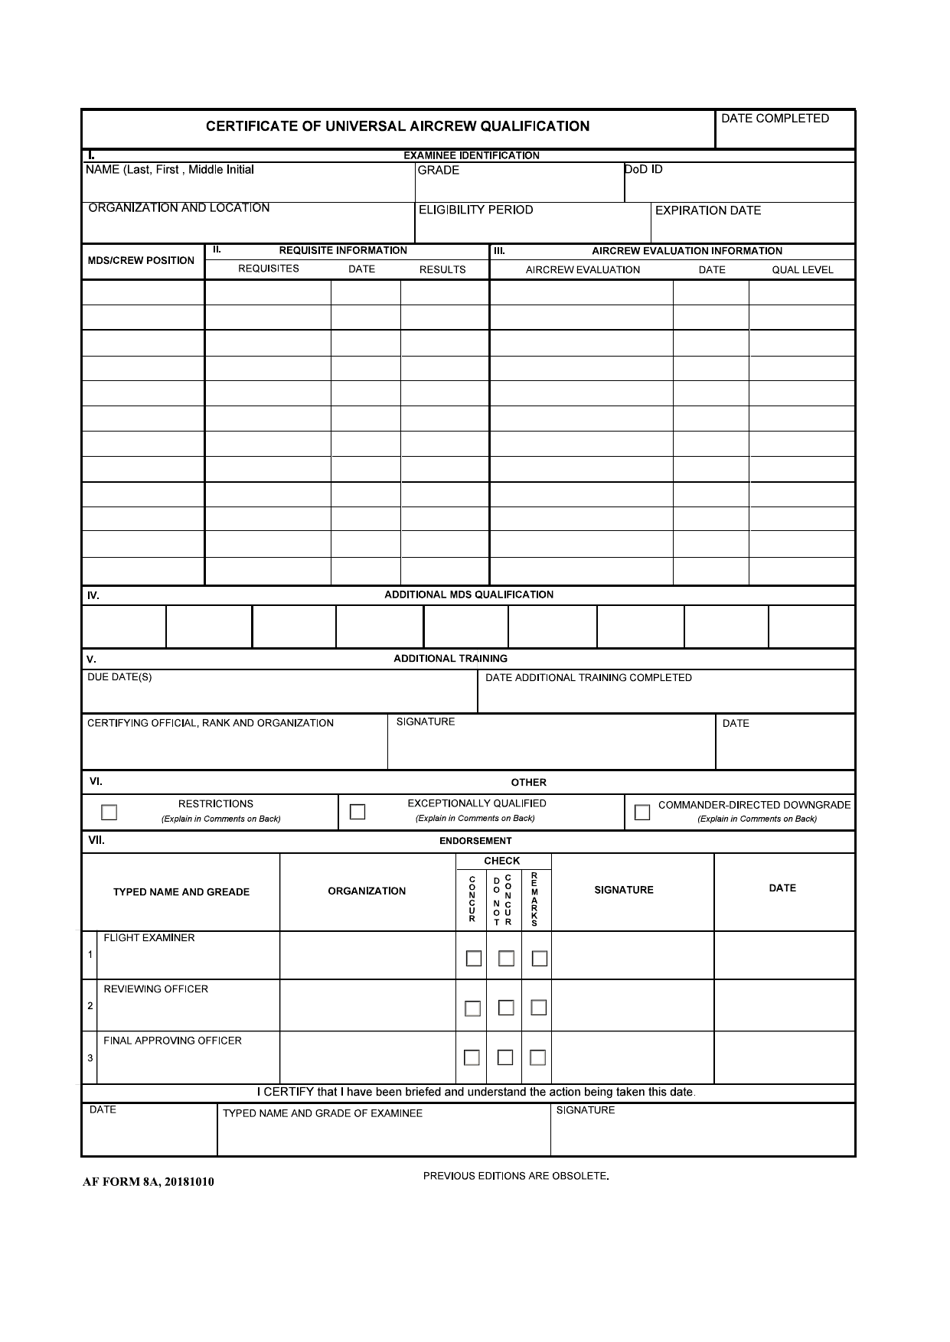 AF Form 8A Certificate of Universal Aircrew Qualification, Page 1